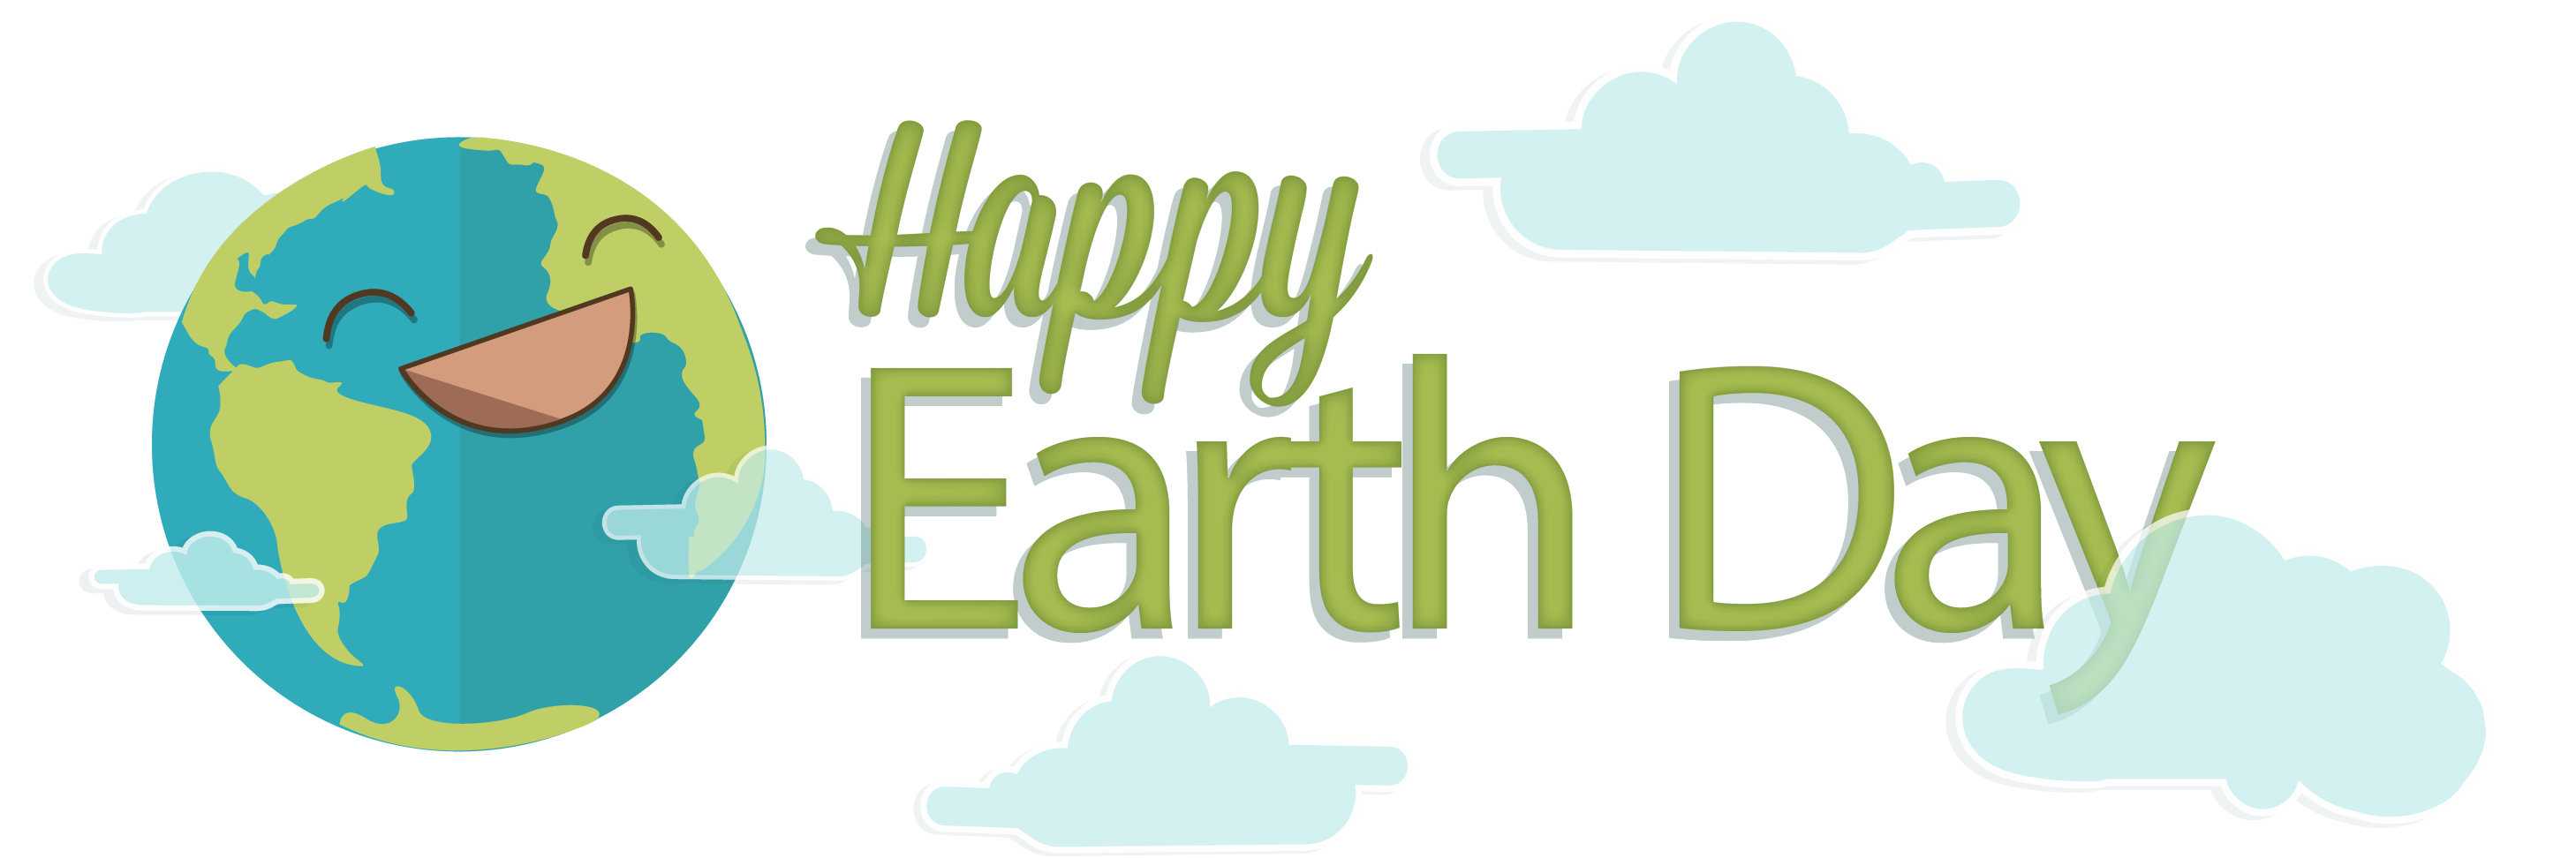 Happy Earth Day Background PNG Image